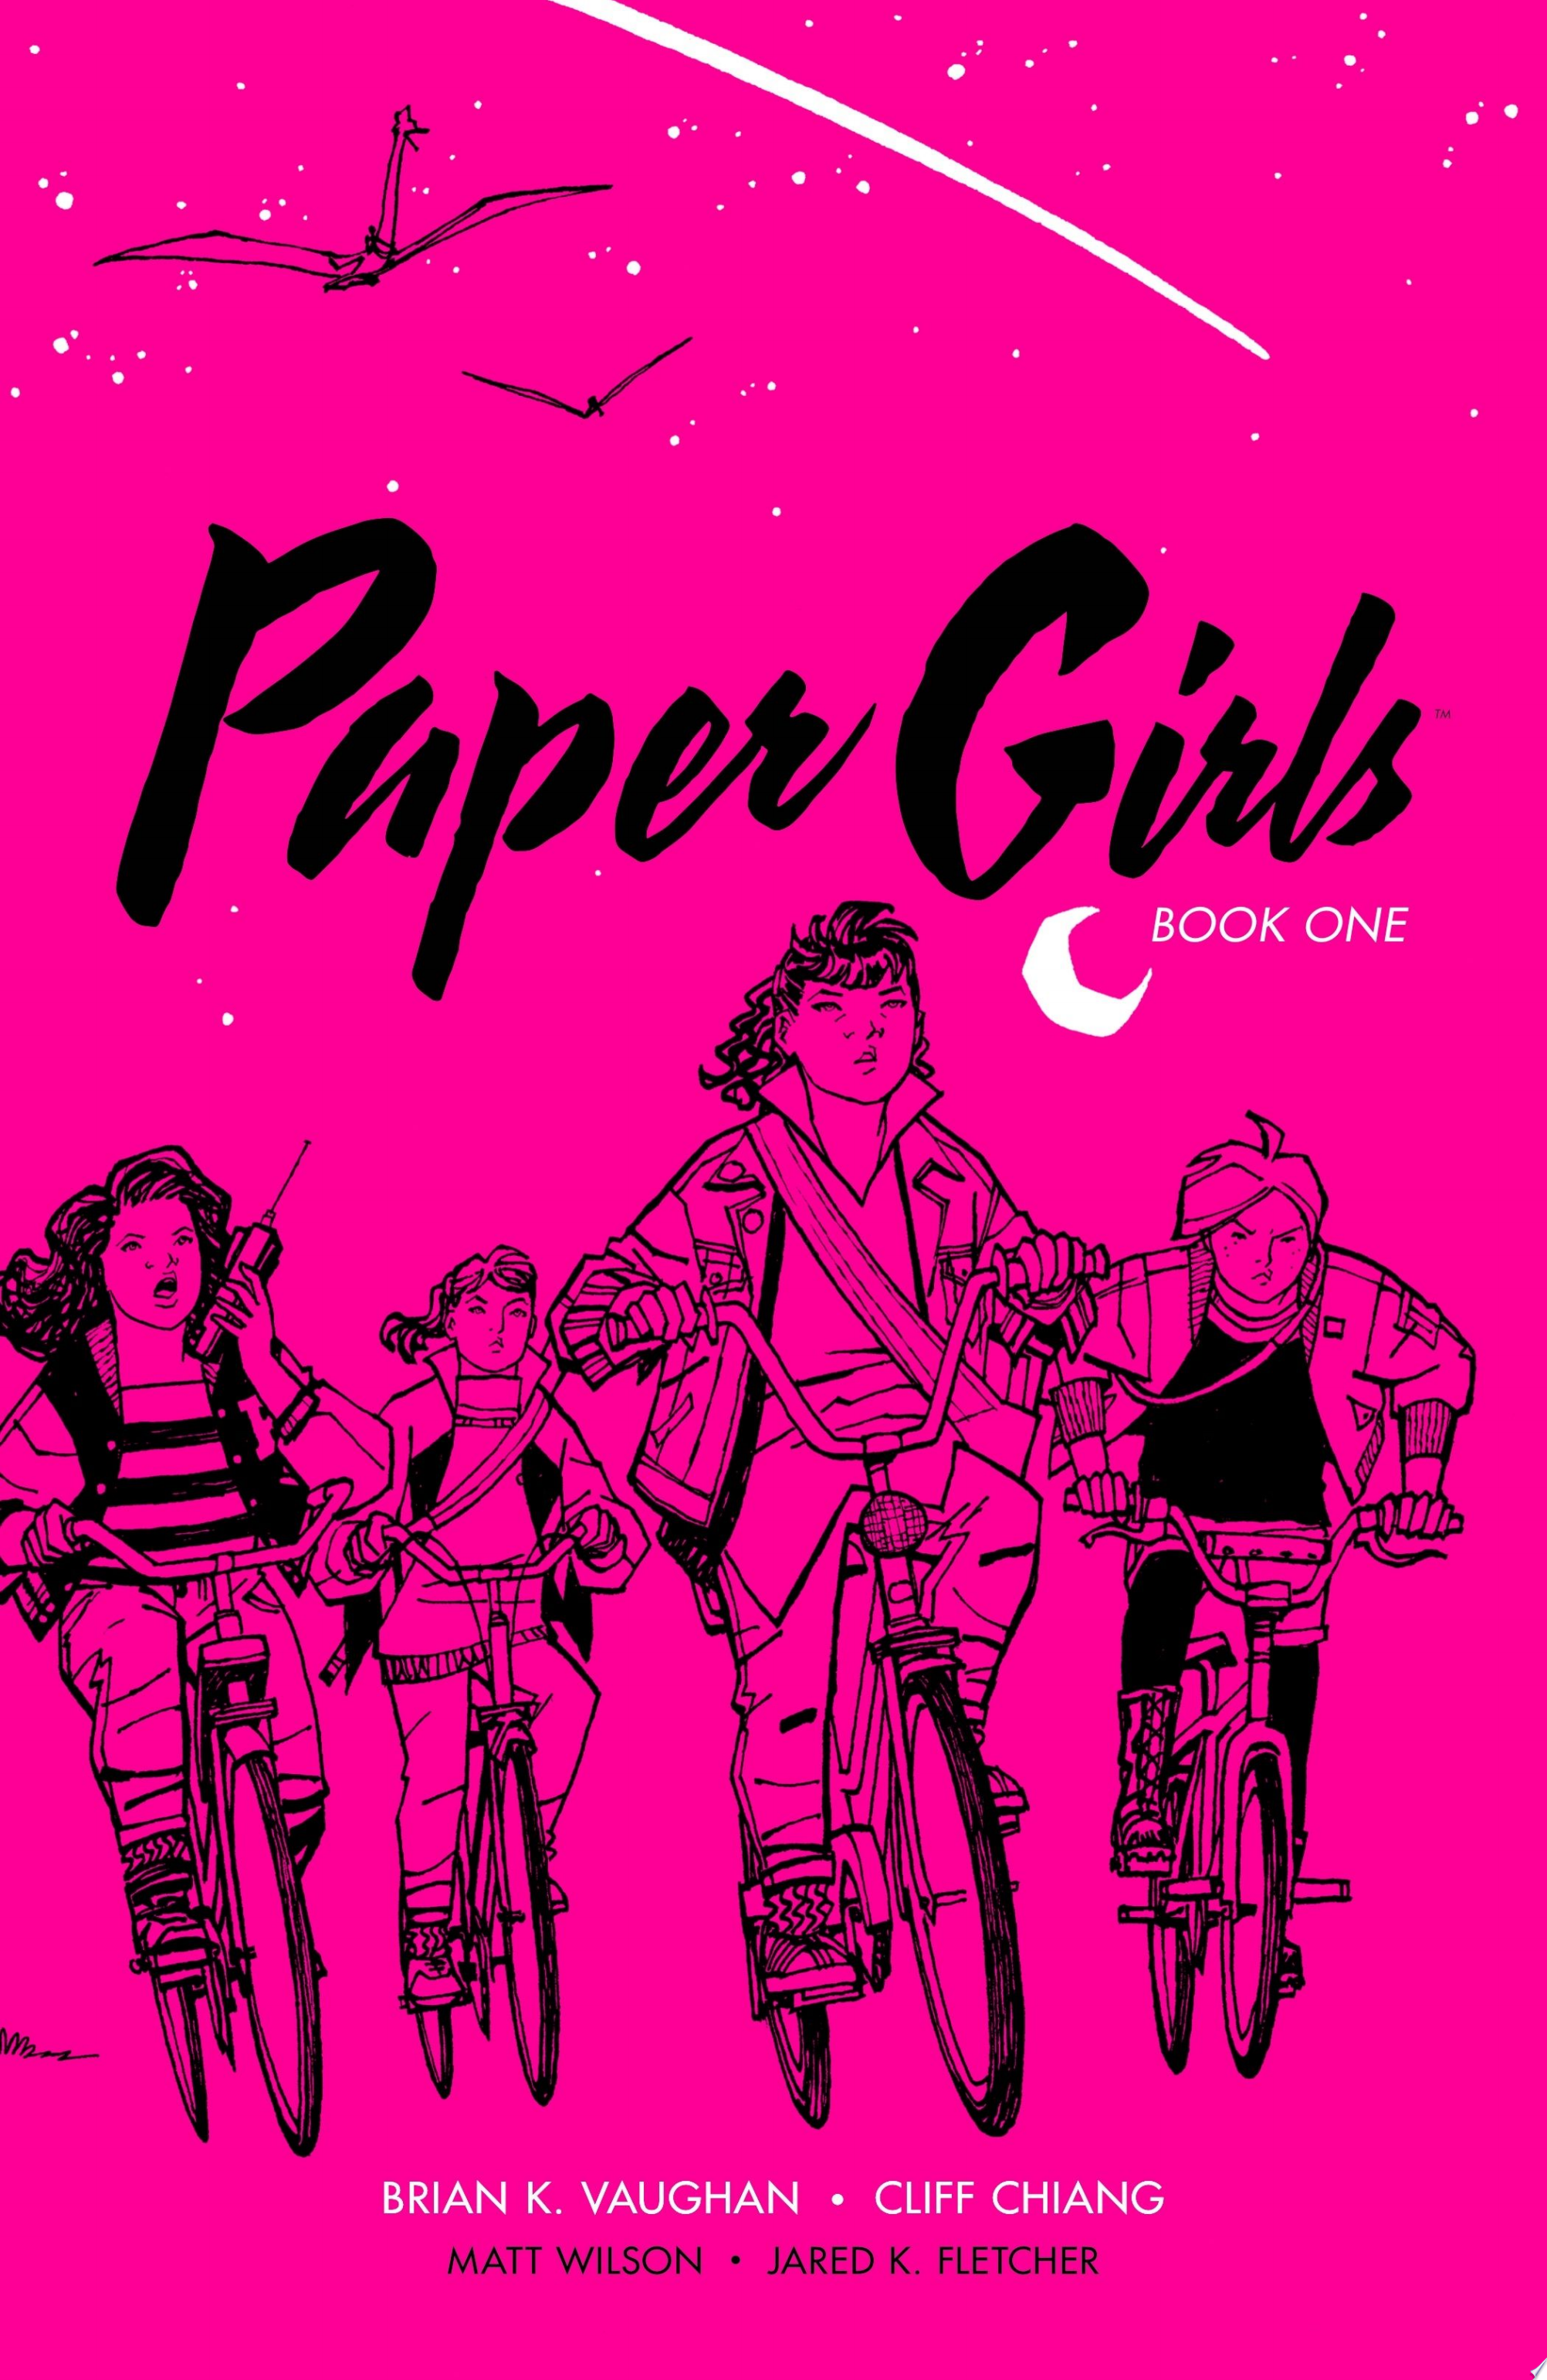 Image for "Paper Girls: Book One"